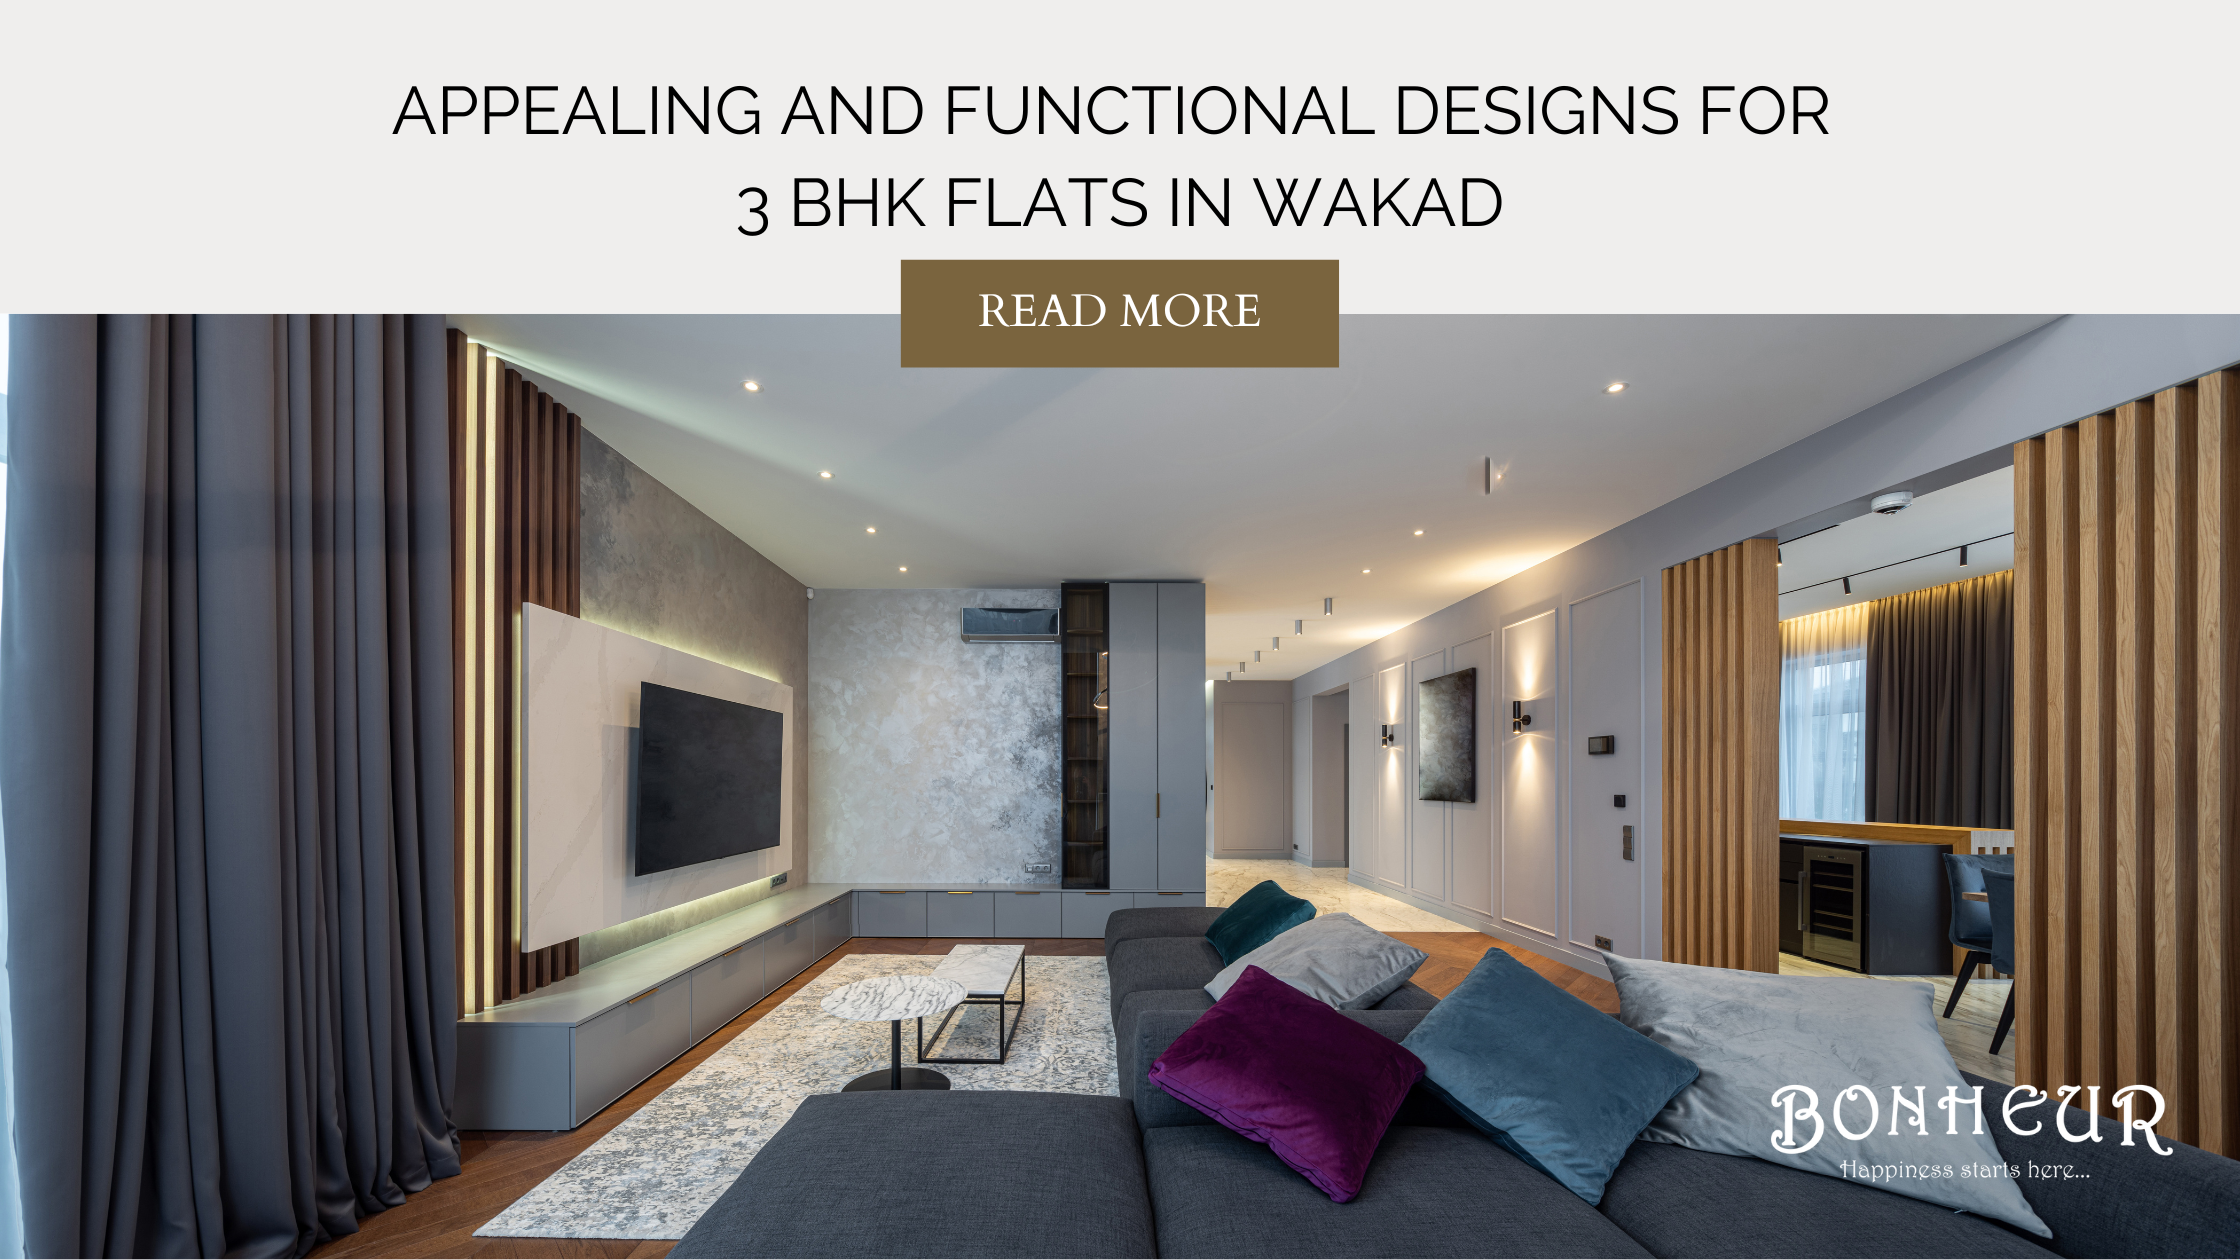 Appealing and functional designs for 3 BHK flats in Wakad